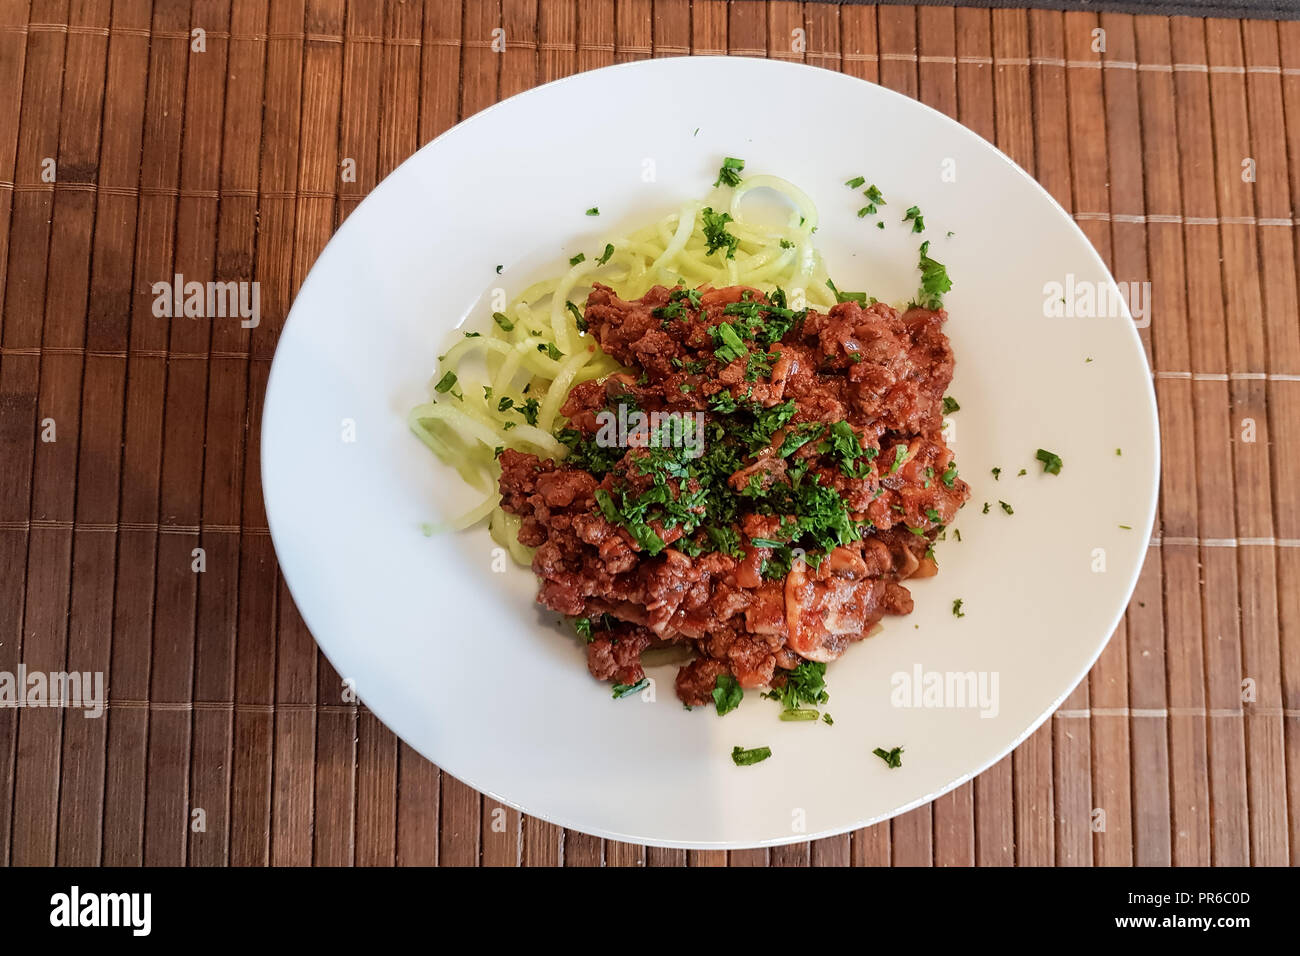 Healthy low carb food on white plate, lunch with snake cucumber in spaghetti strips cut above beef tartare with tomato sauce. Stock Photo